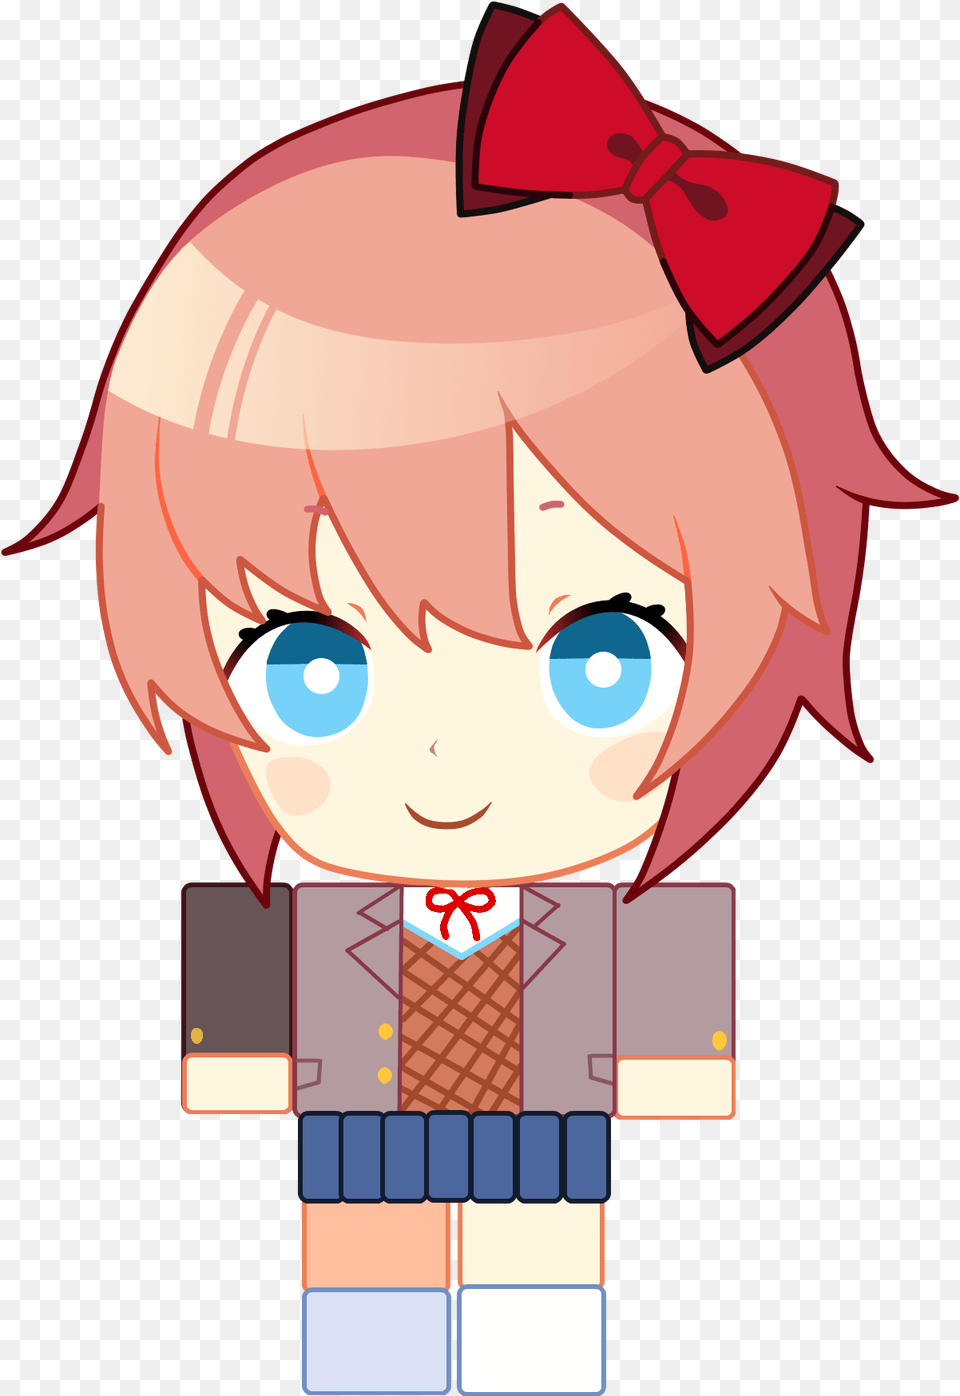 Doki Doki Literature Club Red Clothing Face Facial Doki Doki Literature Club Chibi Sprites, Accessories, Formal Wear, Tie, Book Free Png